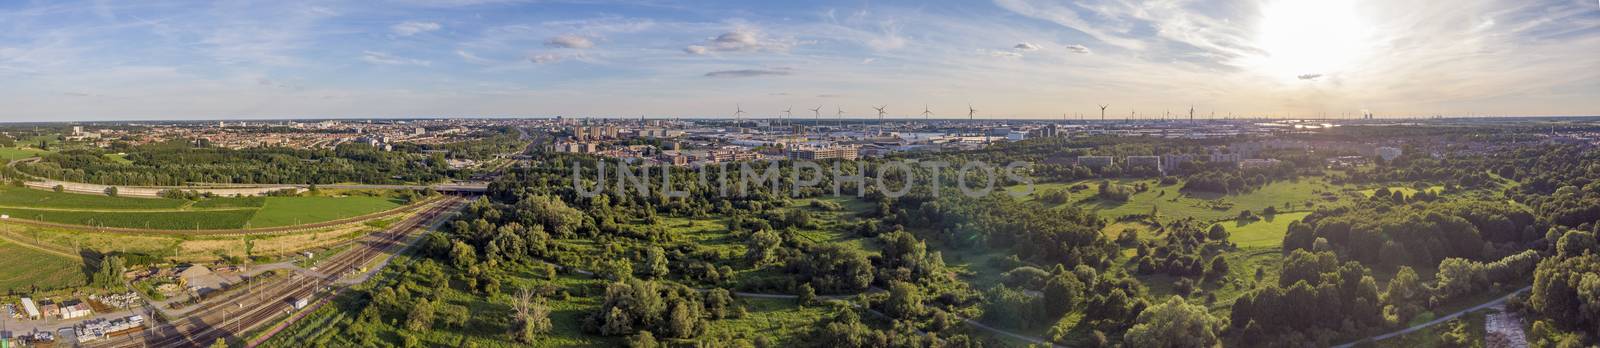 View on Antwerp North area, with city and harbor in far distance, nature park oude landen in foreground. Travel and Tourism.